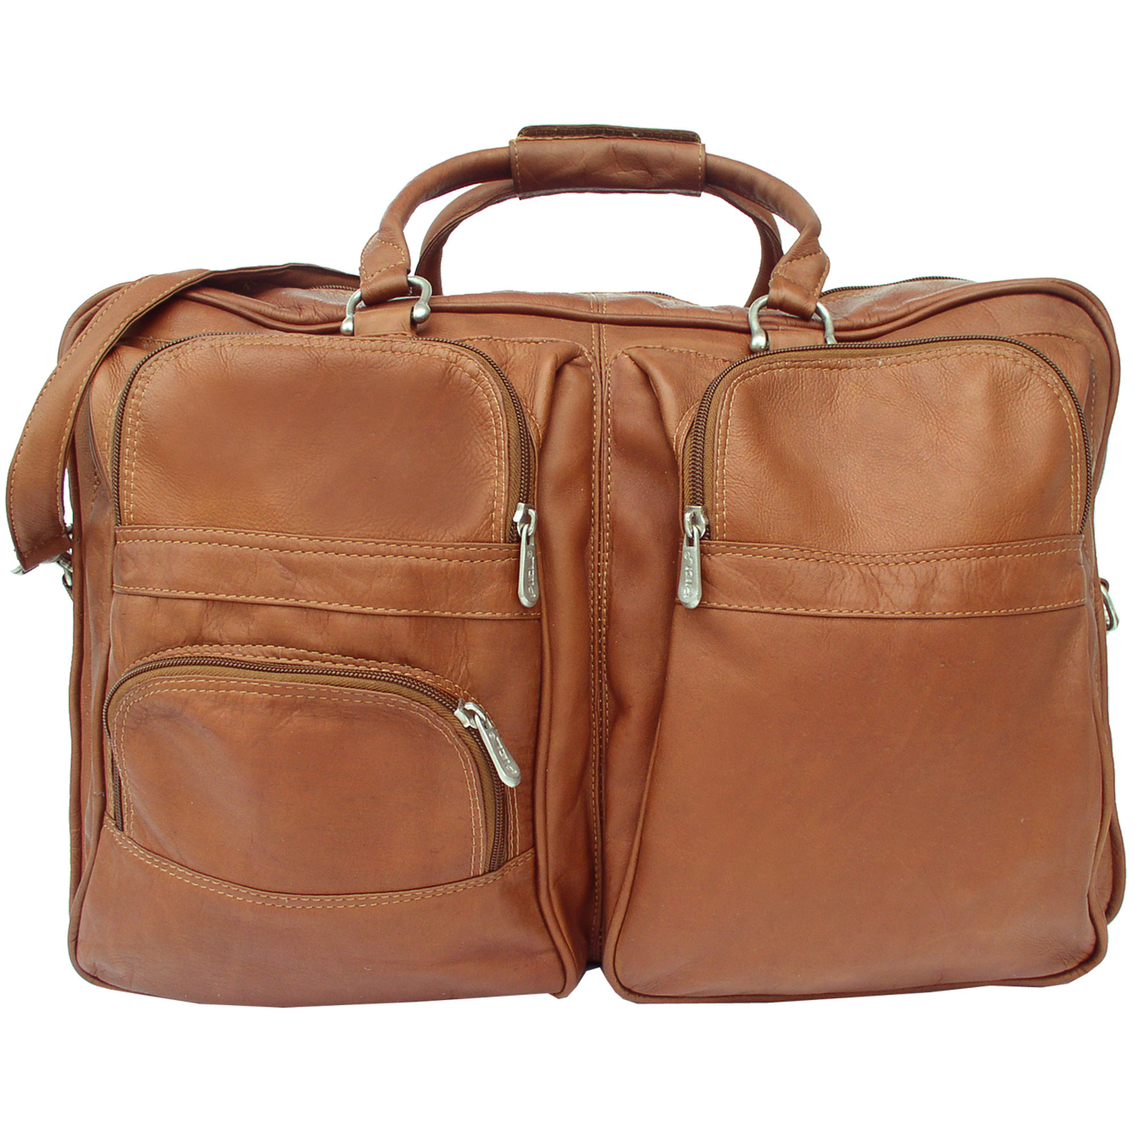 Piel Luggage Leather Complete Carry All Bag | Luggage | Clothing ...